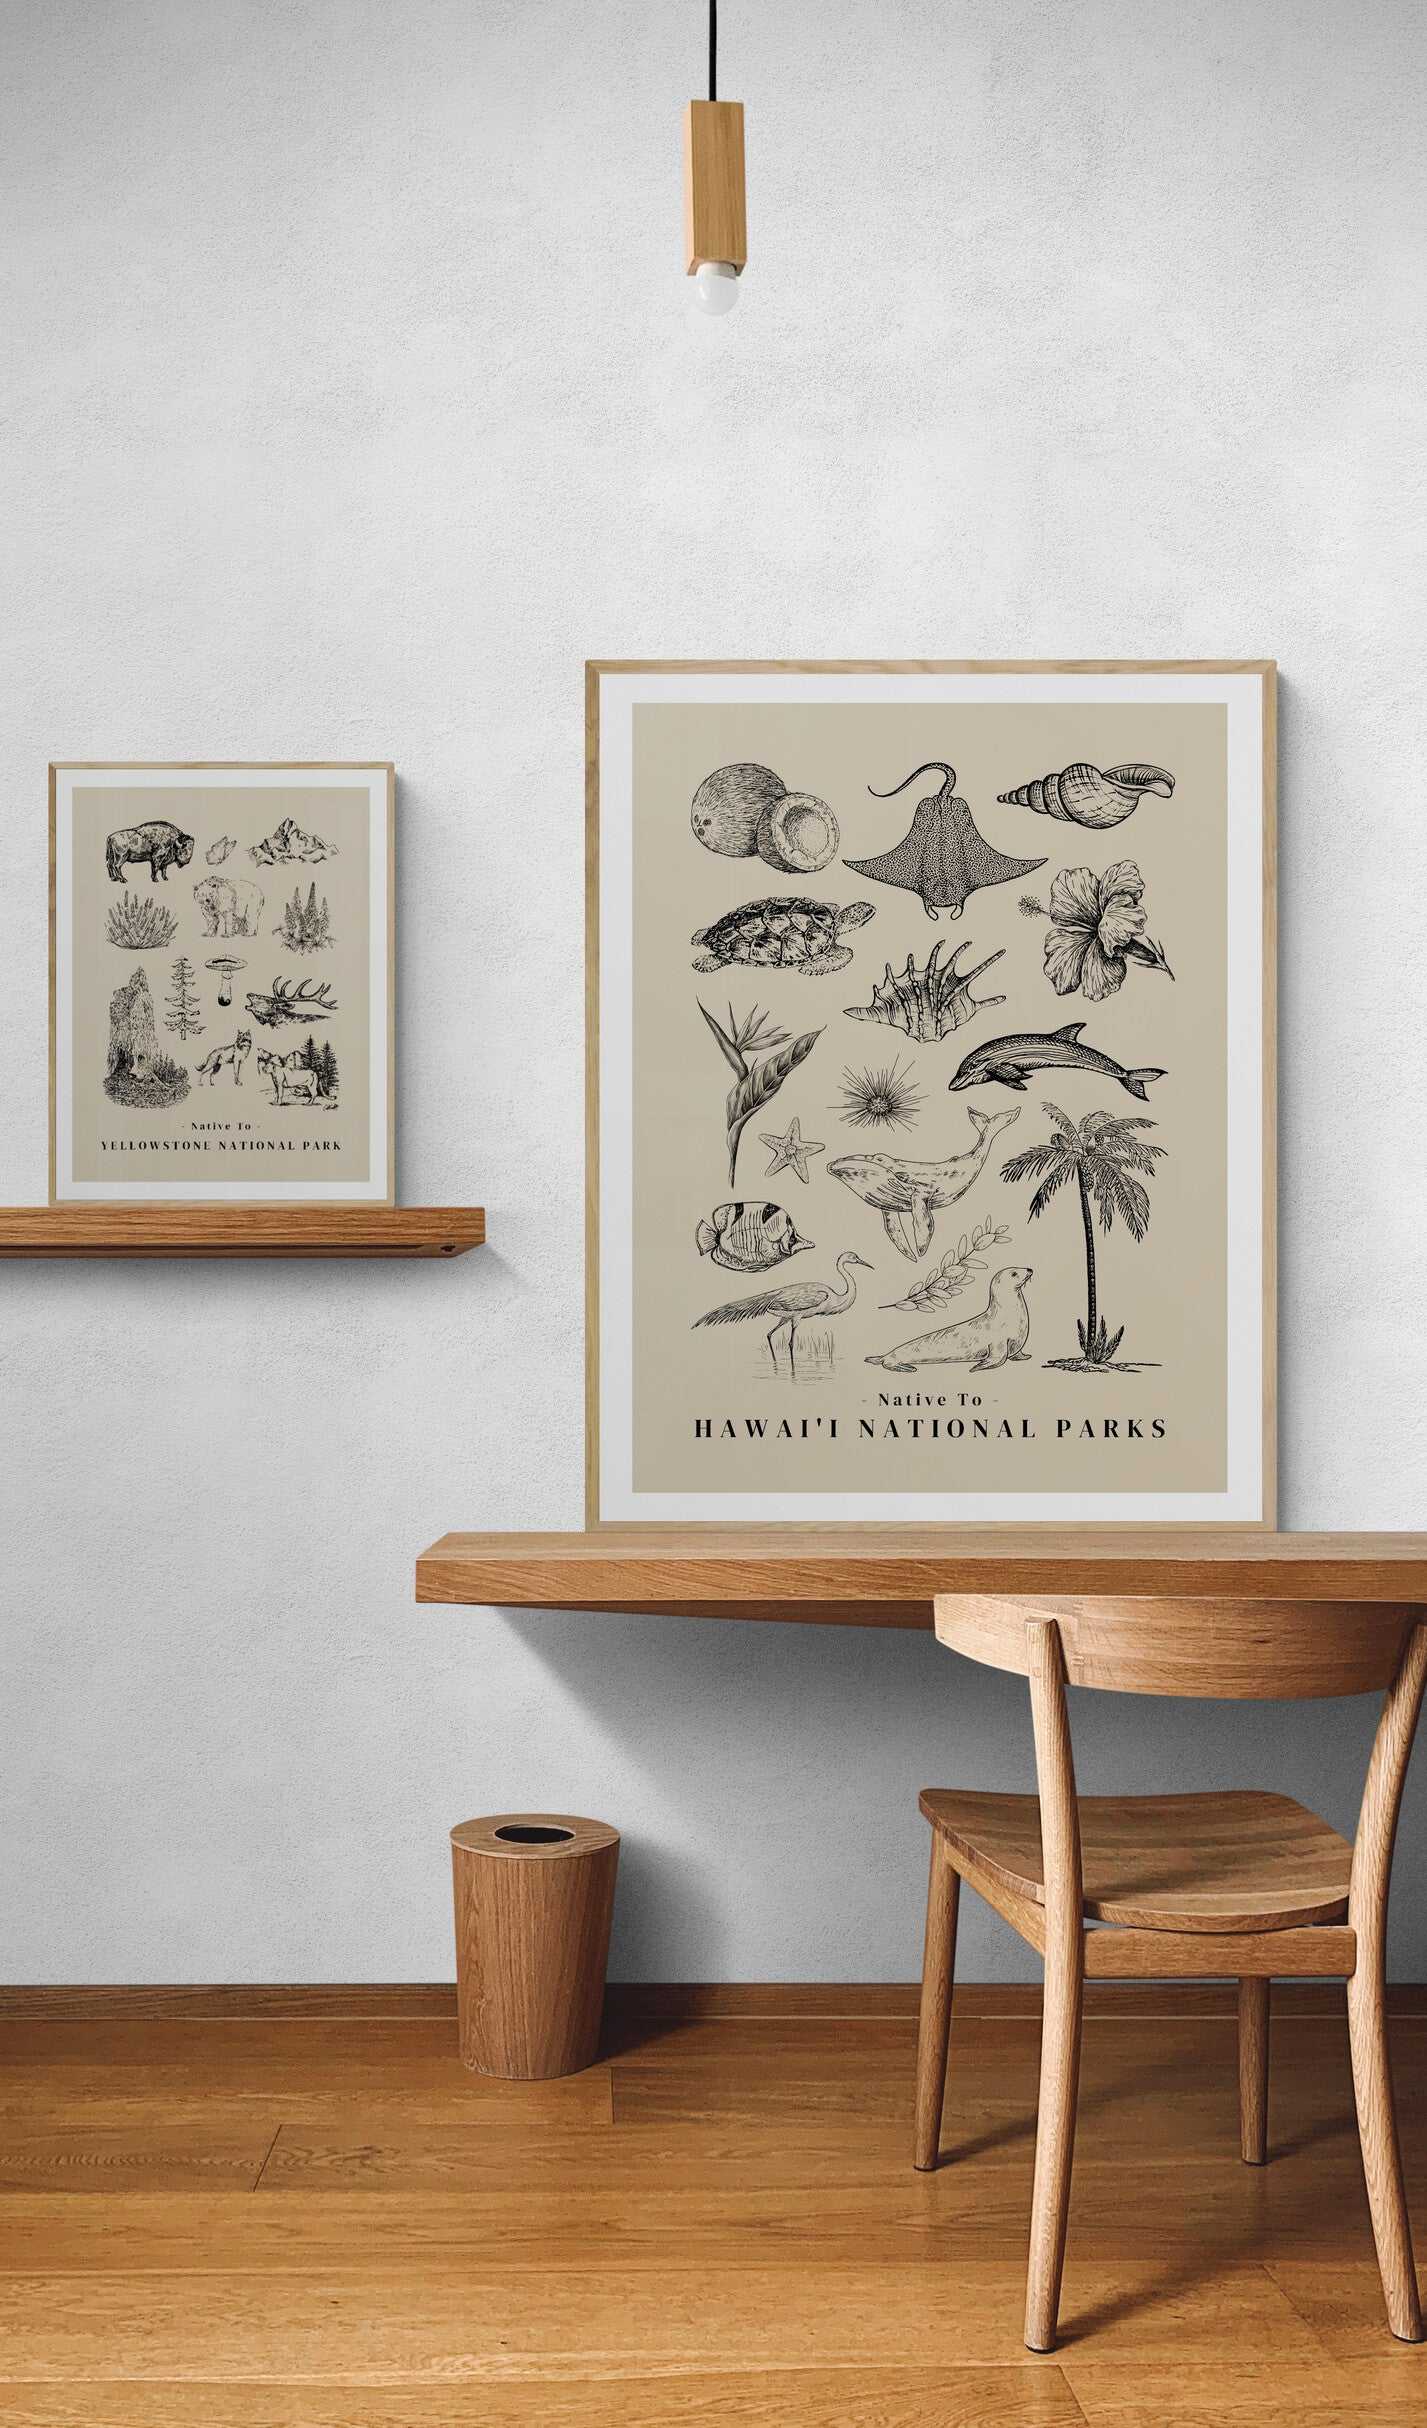 Native to Hawai'i National Parks Illustrated Poster